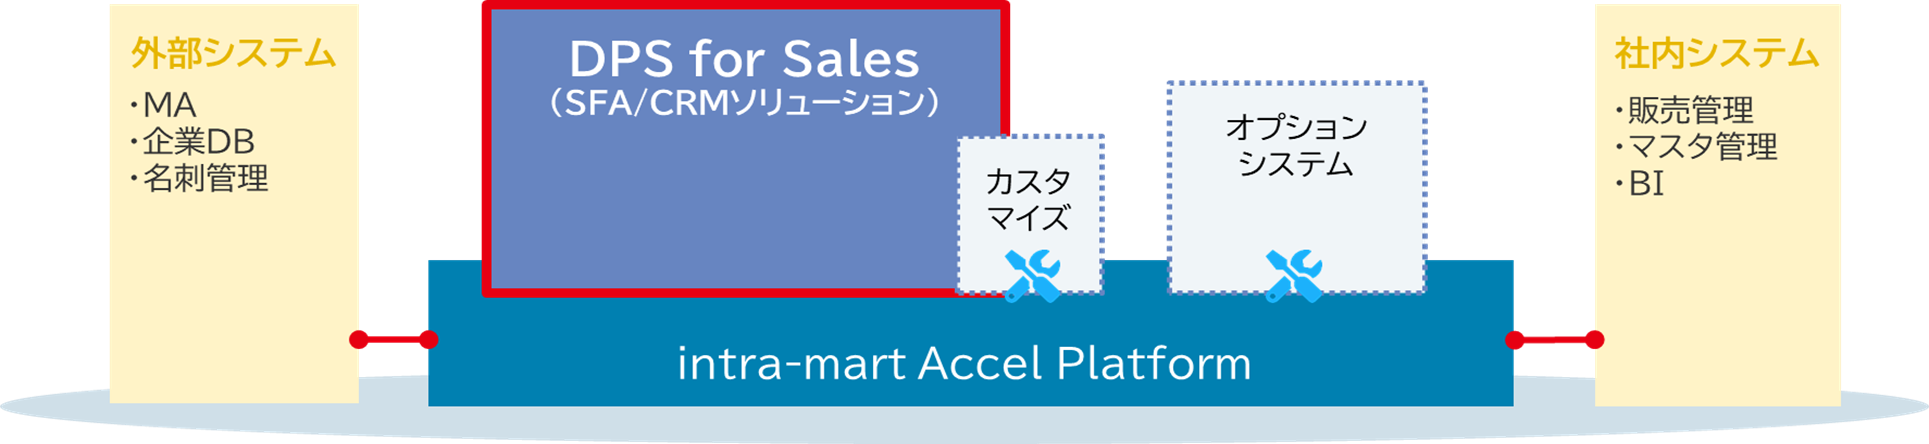 intra-mart DPS for Sales 概要
DPS概要
intra-mart　営業支援ツール
intra-mart　SFA
SFA
CRM